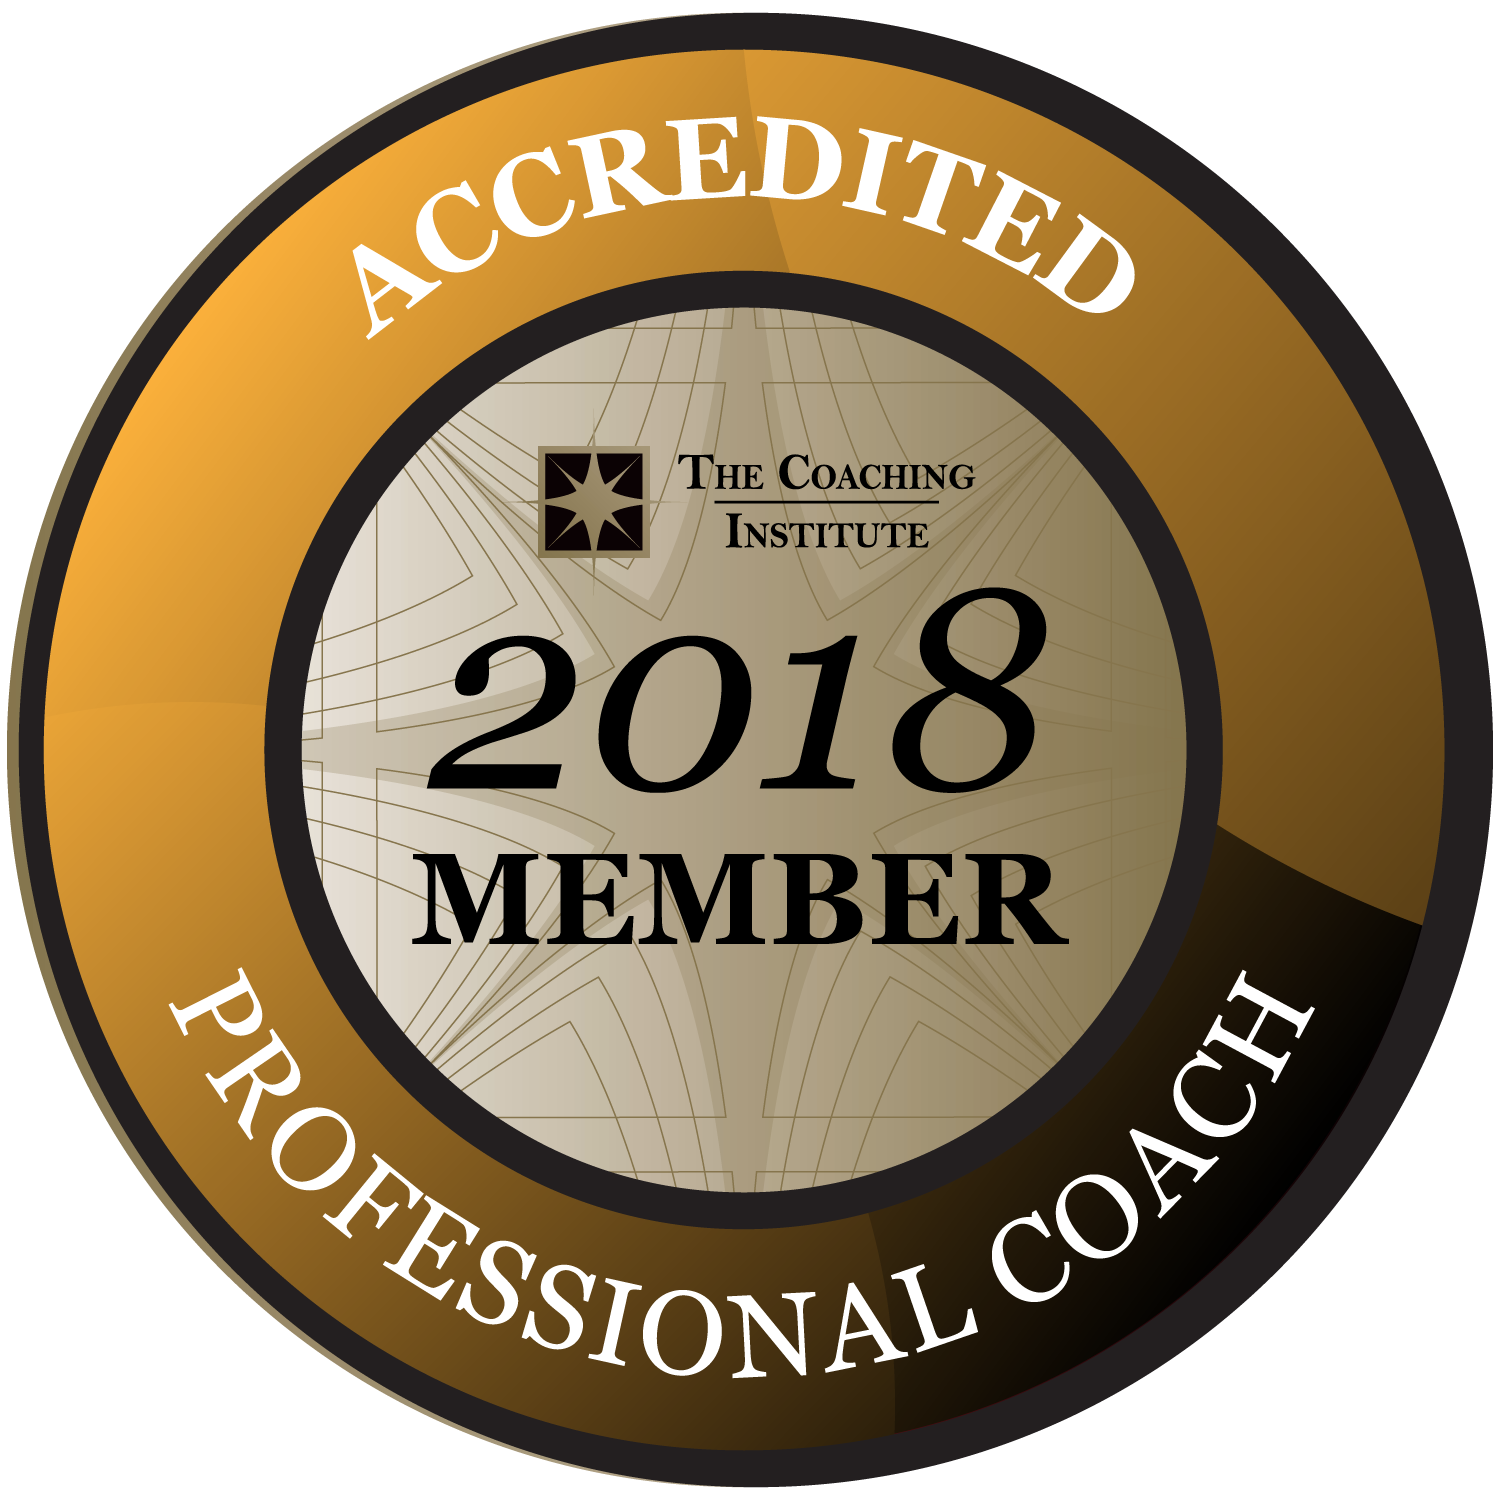 Professional Coach Members 2018 Graduate member of The Coaching Institute’s Accredited Professional Coach group